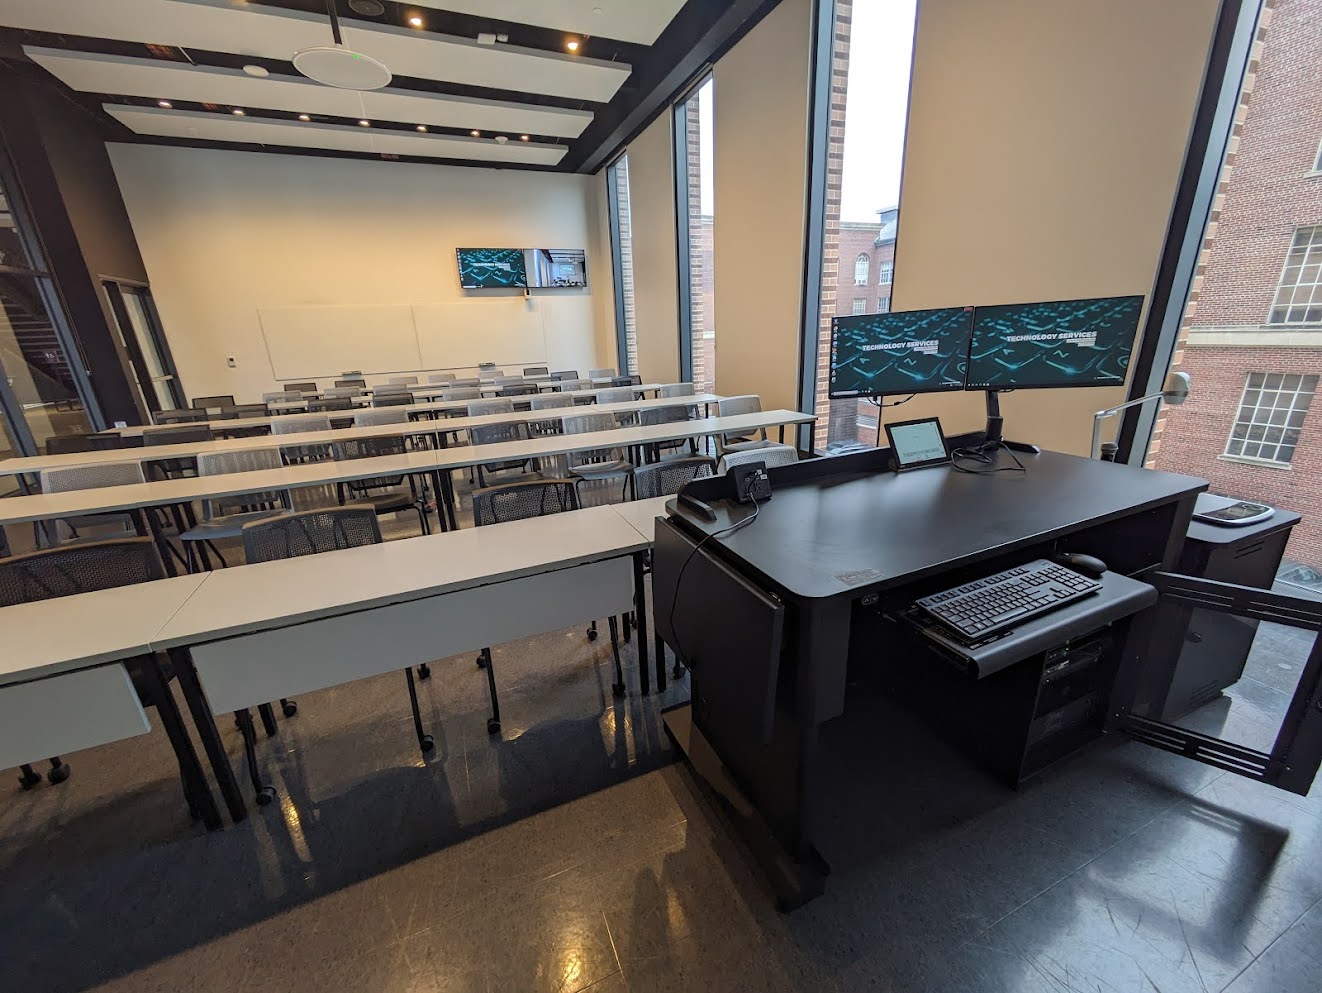 This is a view of the room, with student desks, a front lecture table, and white boards.